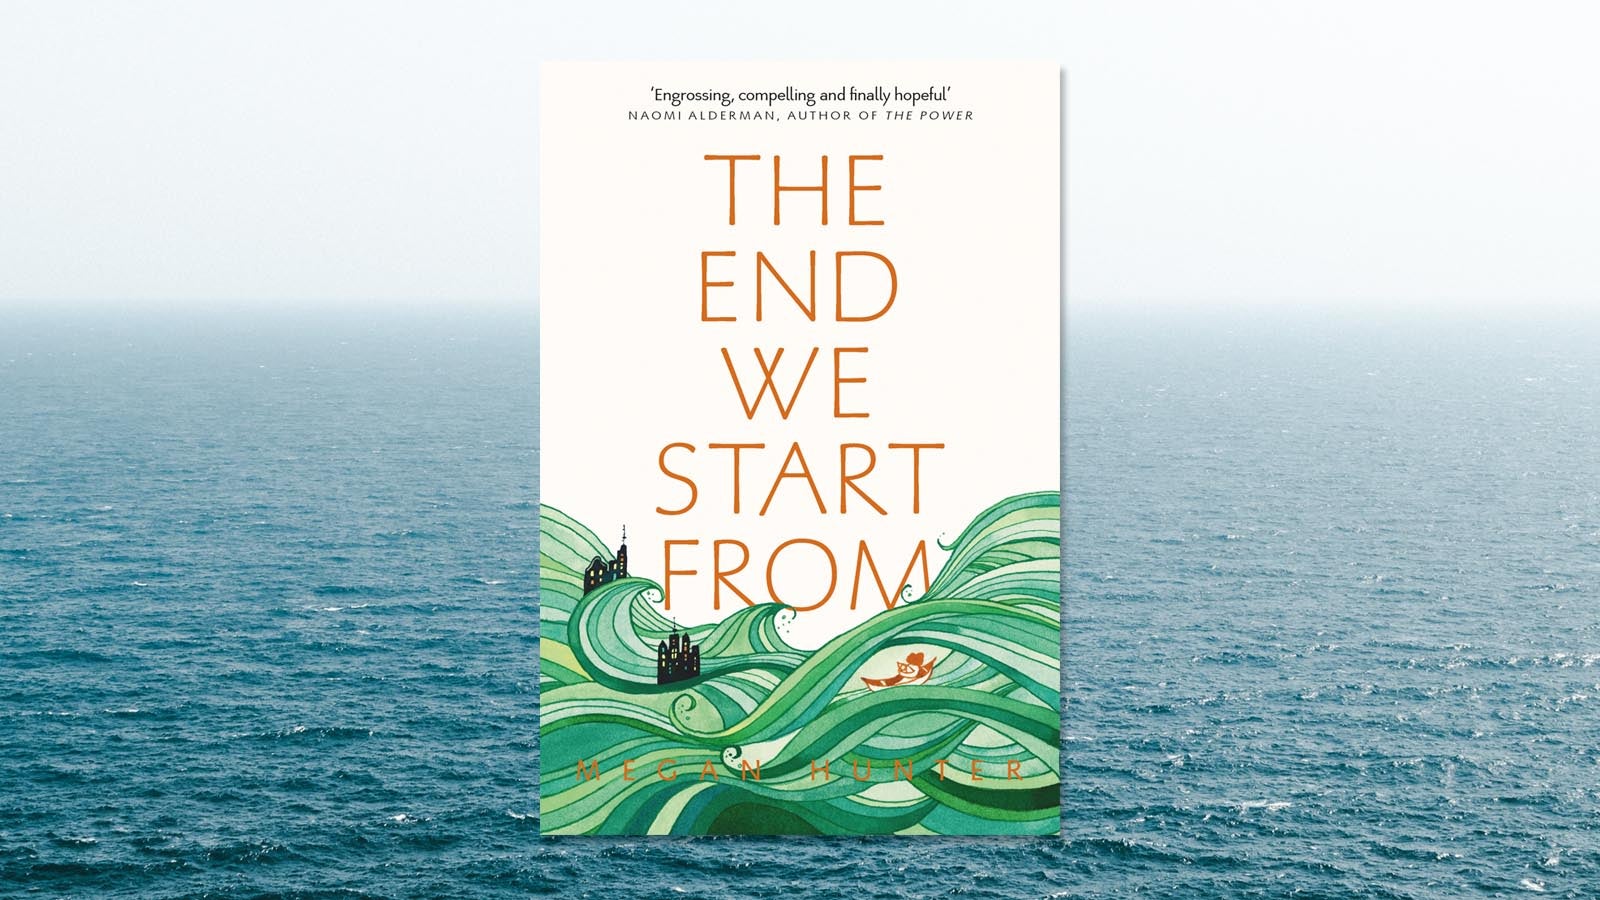 The book cover of the End We Start From against a background of an ocean with a misty sky above